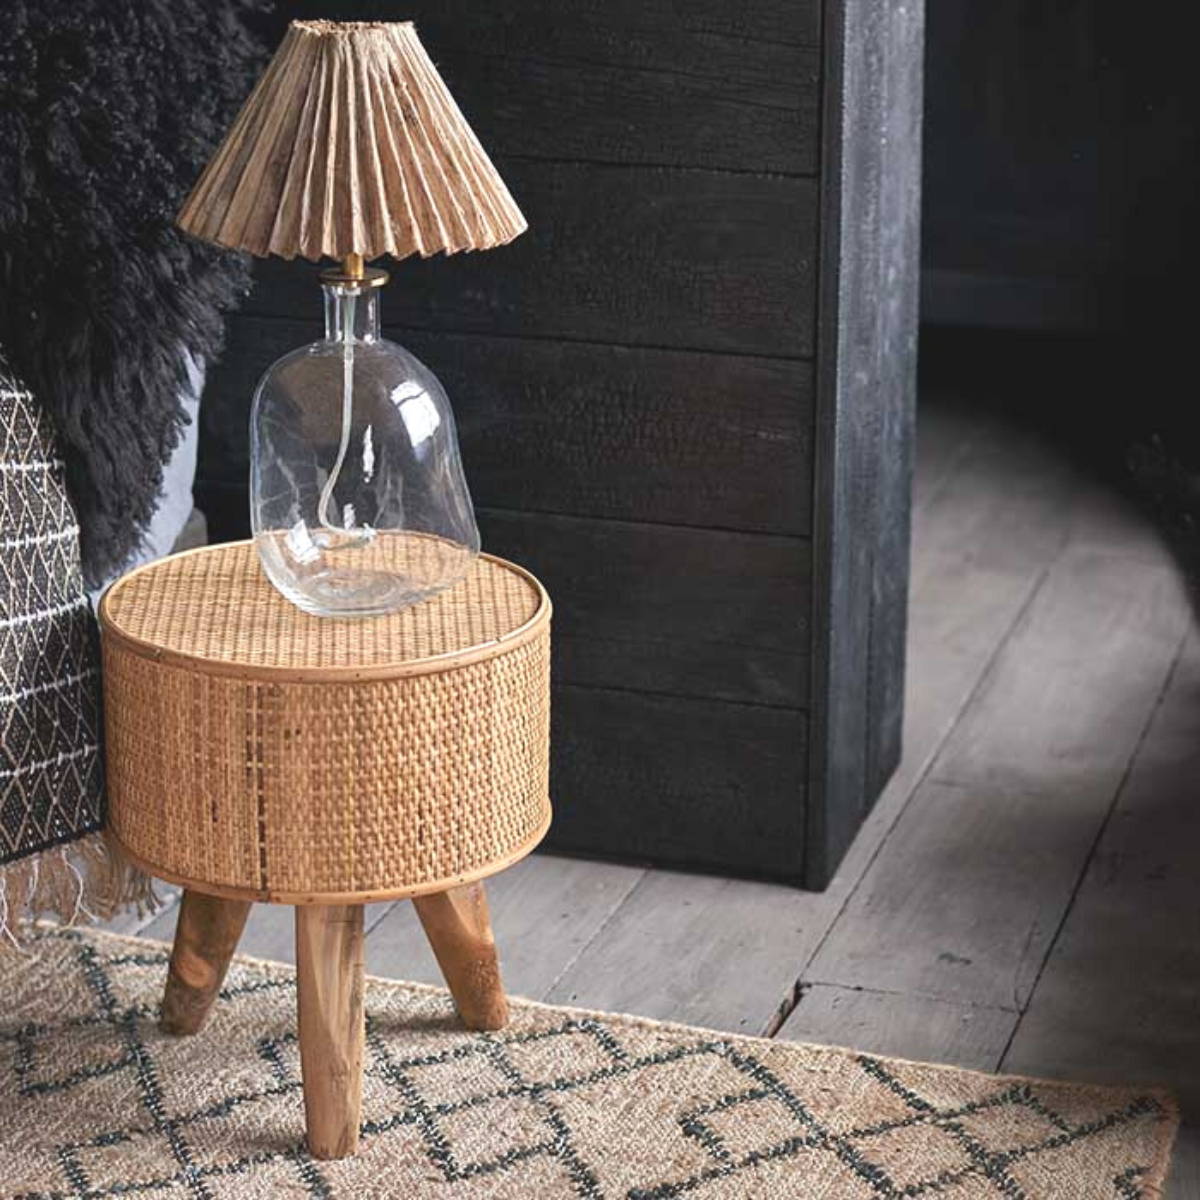 a small bedside table with a lamp made from glass with a brown pleated shade